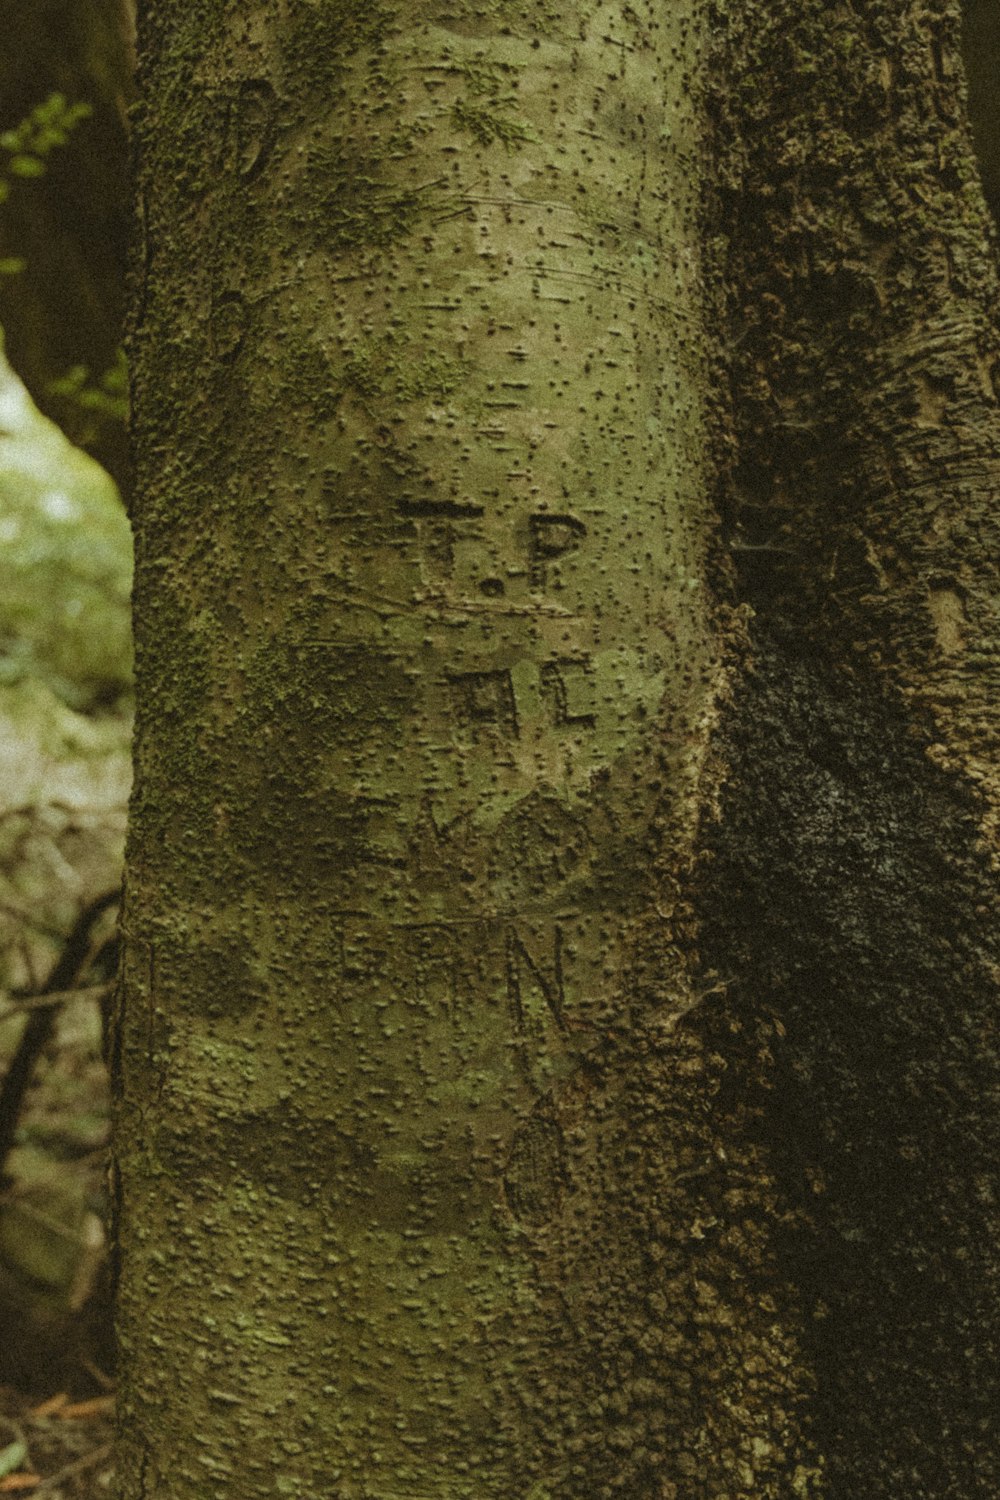 a close up of a tree with a face on it